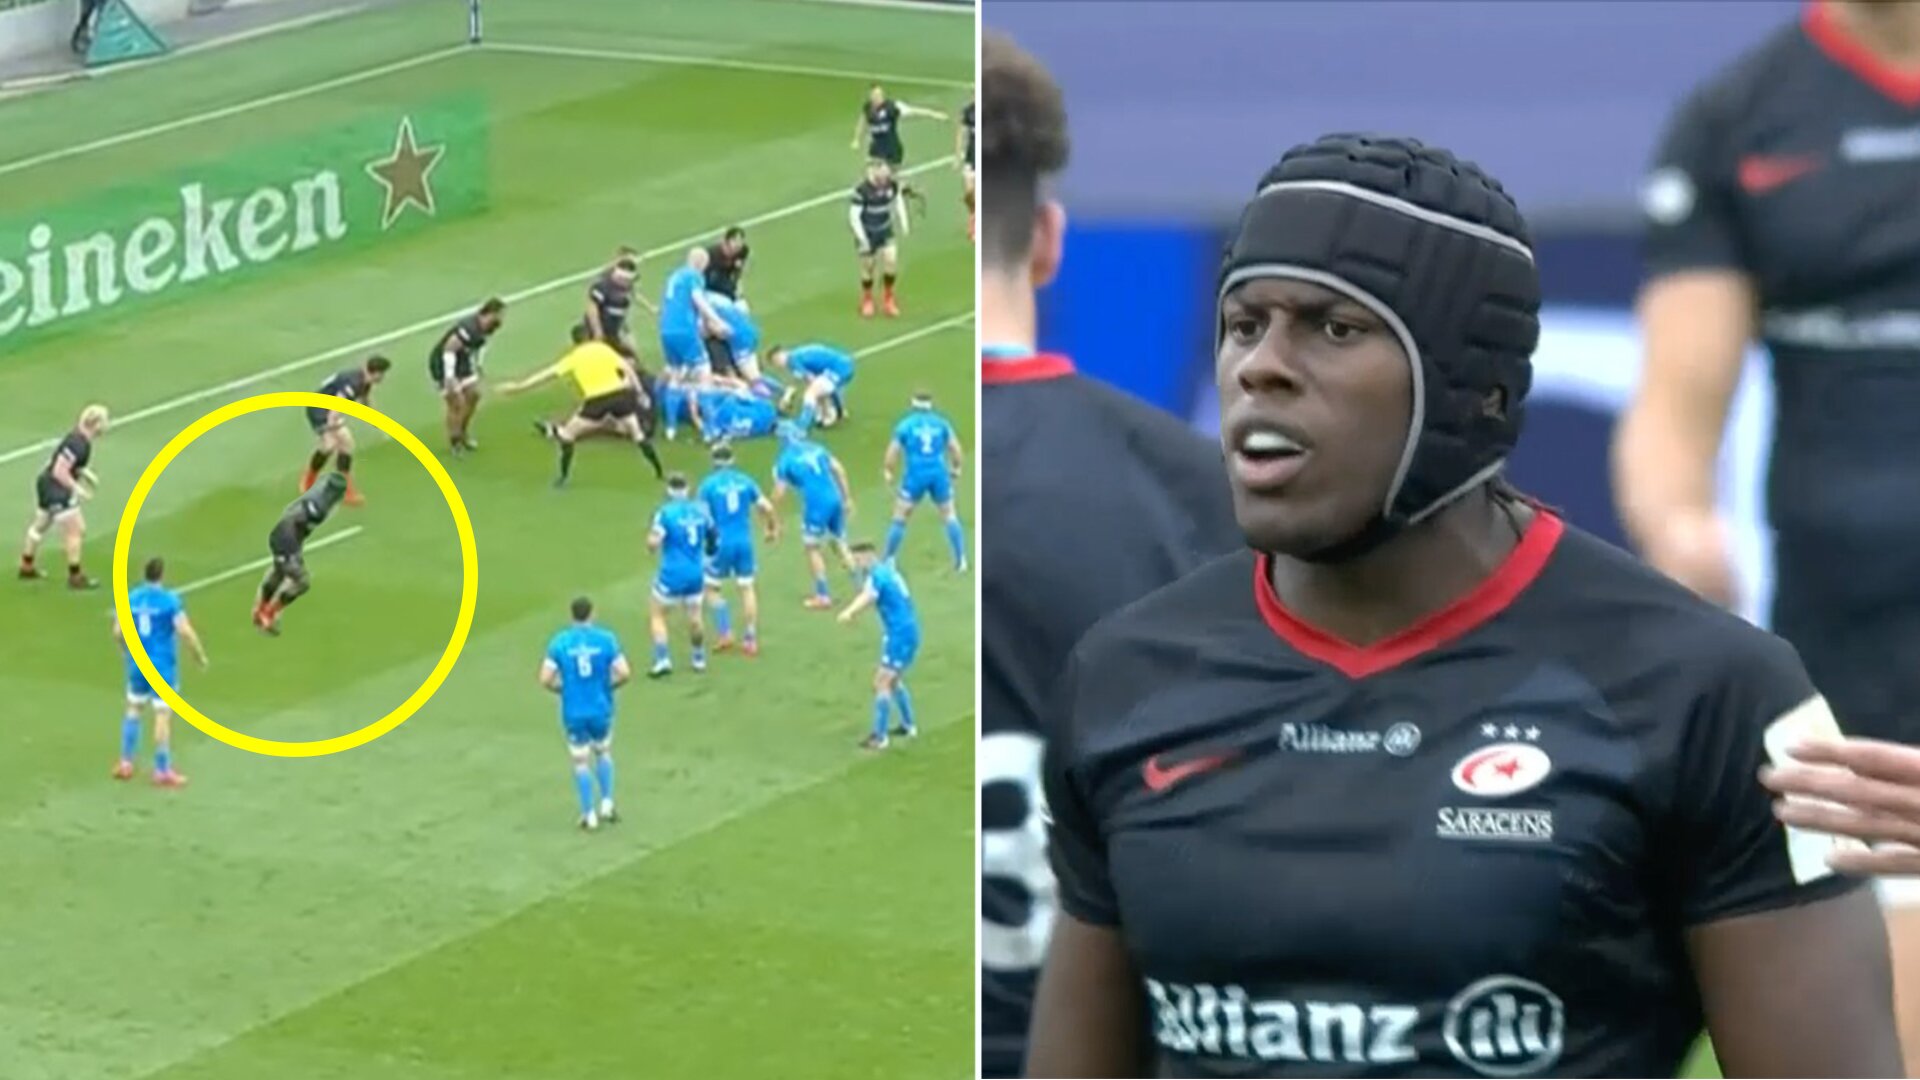 Maro Itoje has Irish fans still raging that he was offside with god tier 500 IQ defence